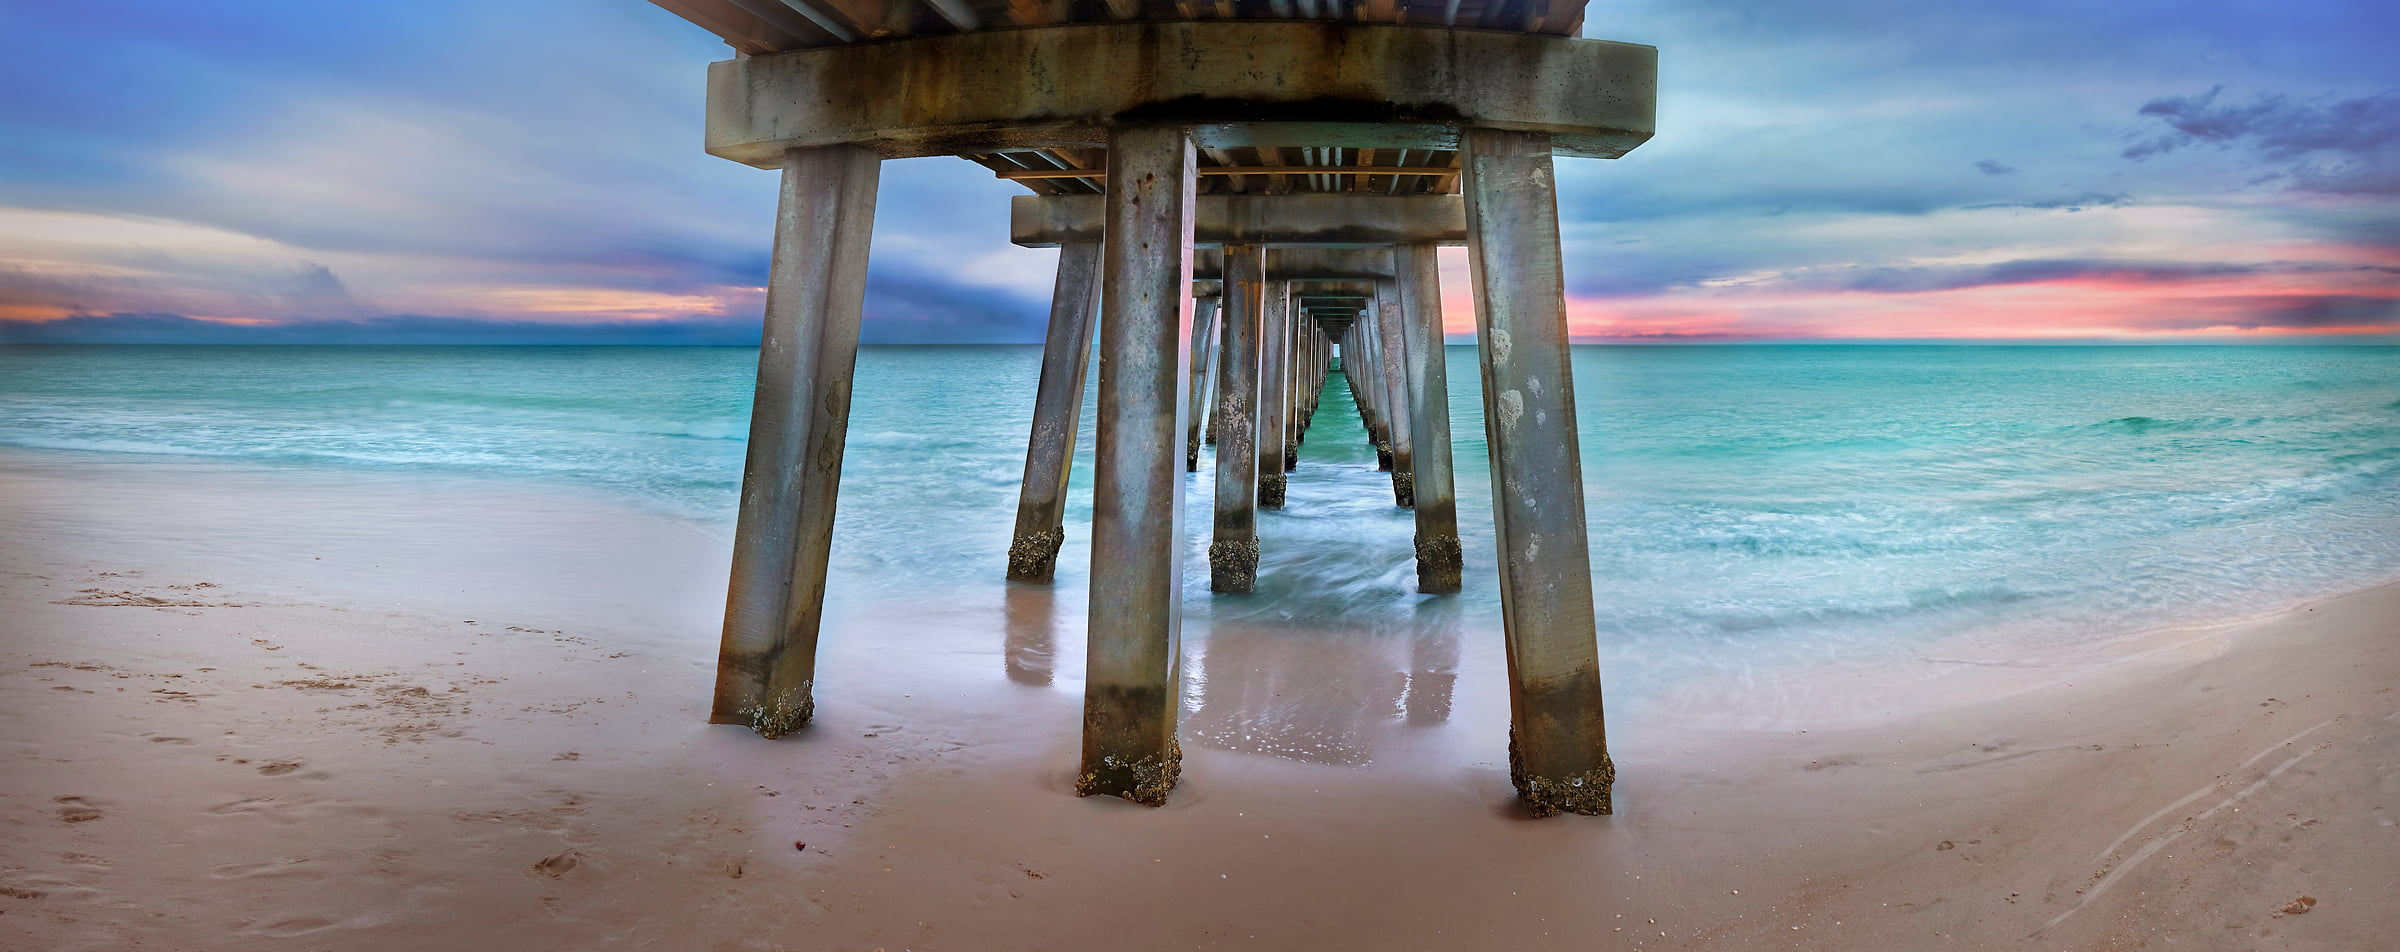 216 megapixels! A very high resolution photo of the beach and ocean under a pier; VAST photo created by Phil Crawshay in Naples Pier, Florida, USA